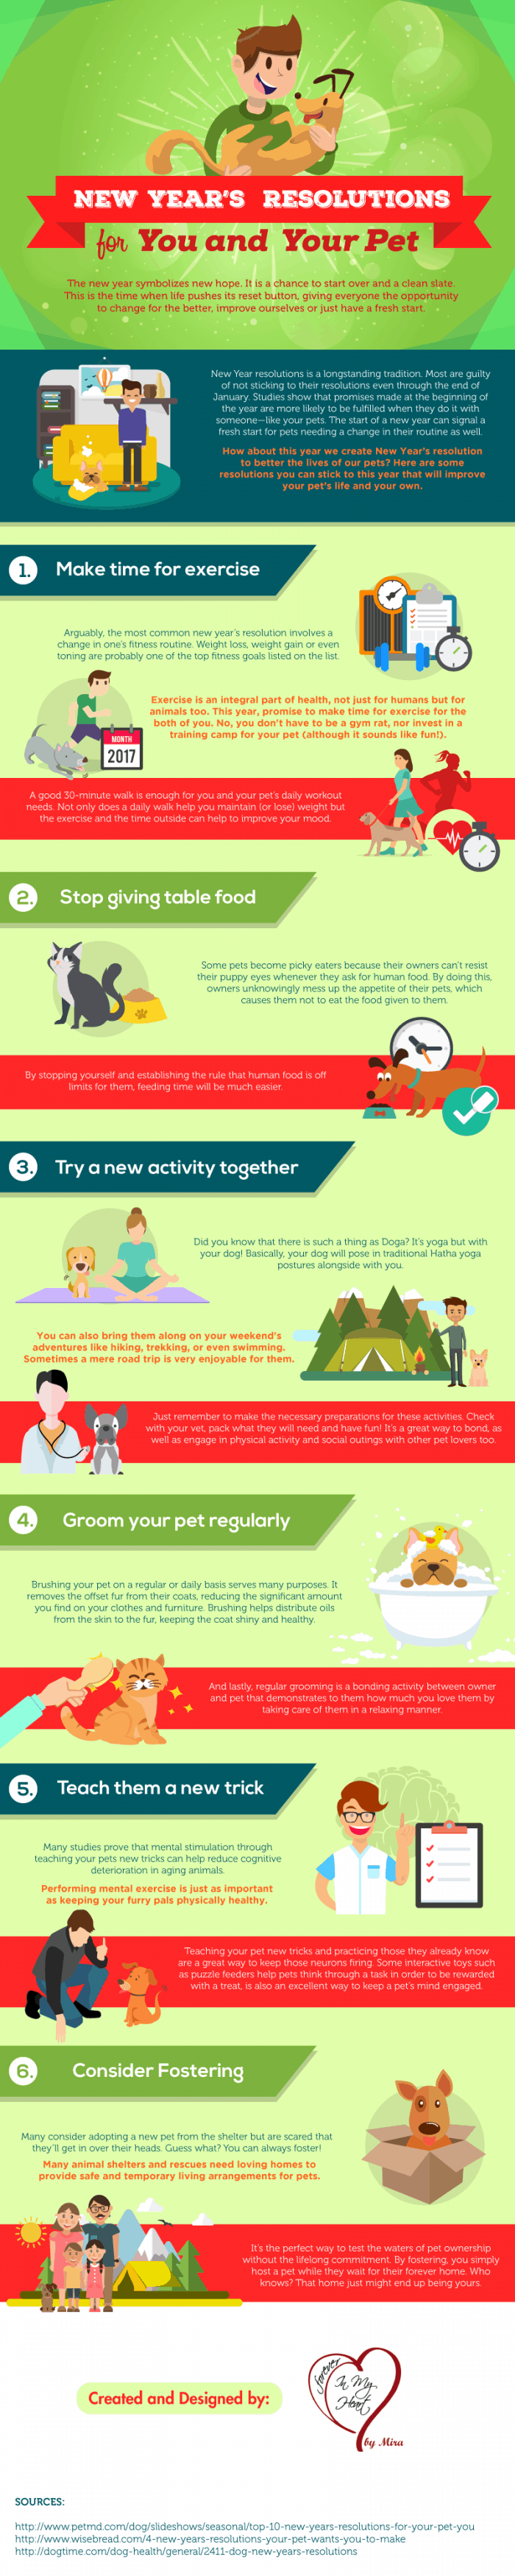 New years resolutions for you and your pet